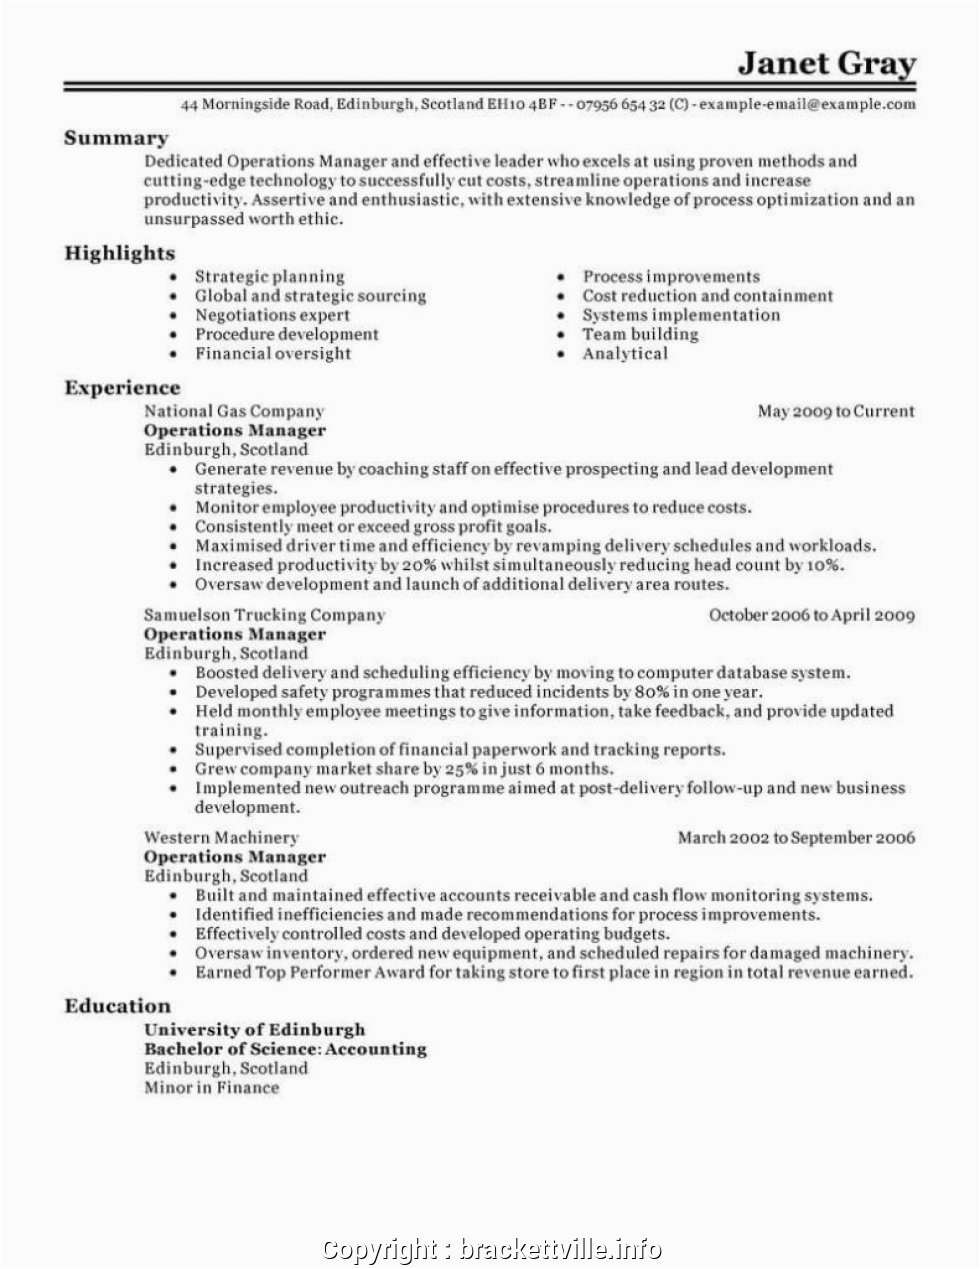 Sample Resume for Retail Operations Manager Print Sample Resume for Retail Operations Manager Resume